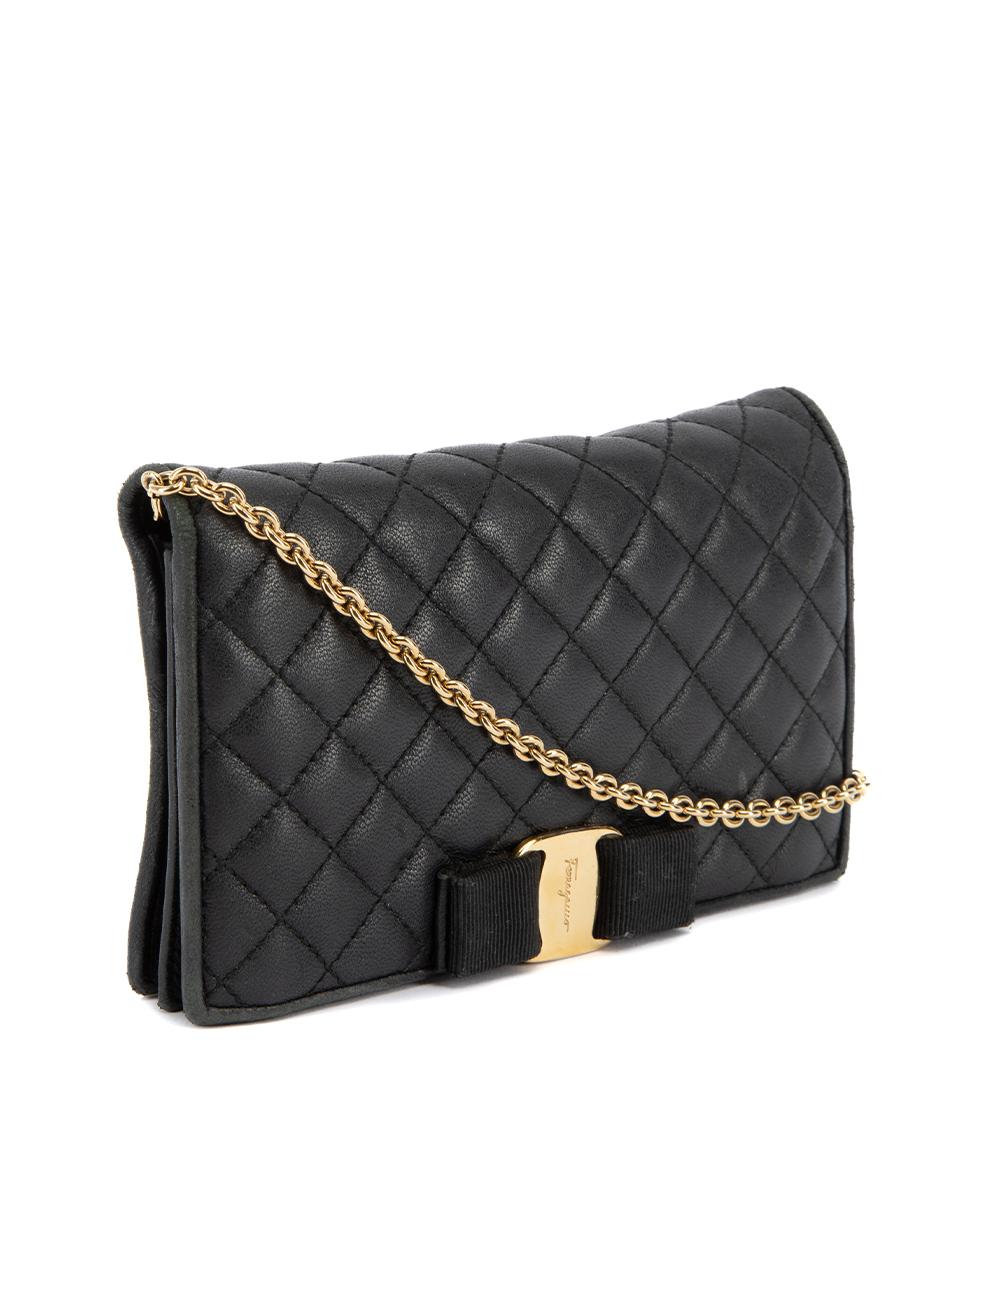 CONDITION is Very good. Minimal wear to wallet is evident to the interior leather material where scuffs can be seen on this used Salvatore Ferragamo designer resale item.   Details  Black Leather Wallet Quilted 1x Detachable gold chain shoulder